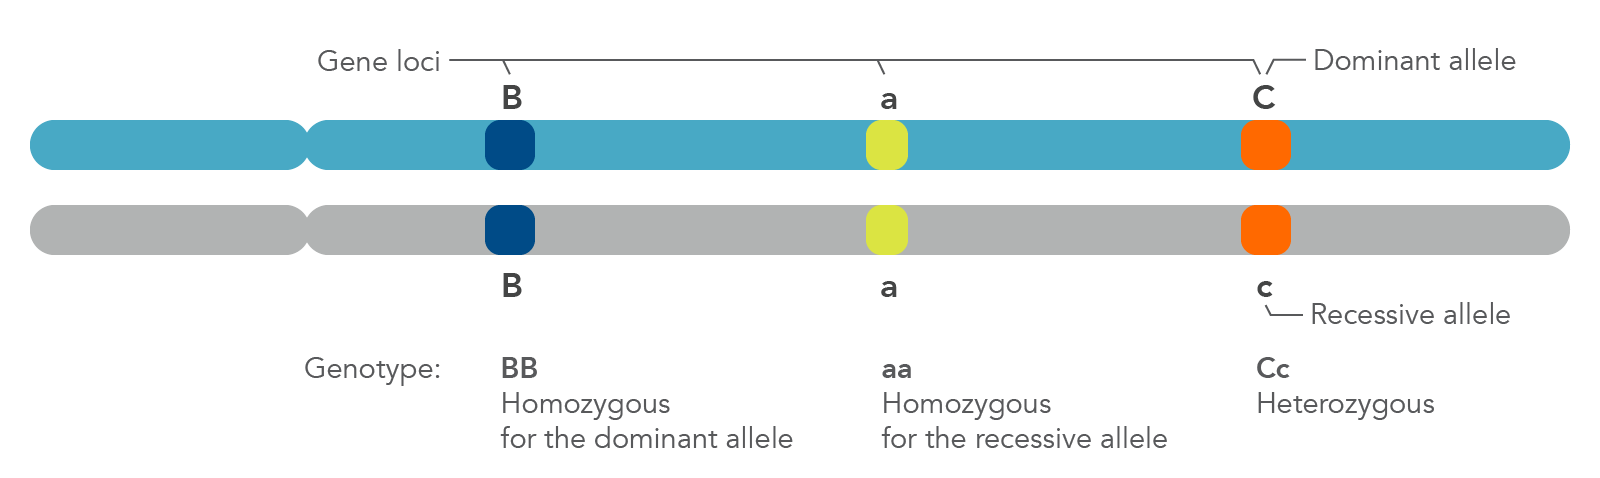 Zygosity is defined by whether a genotype is homozygous (dominant or recessive) or heterozygous.